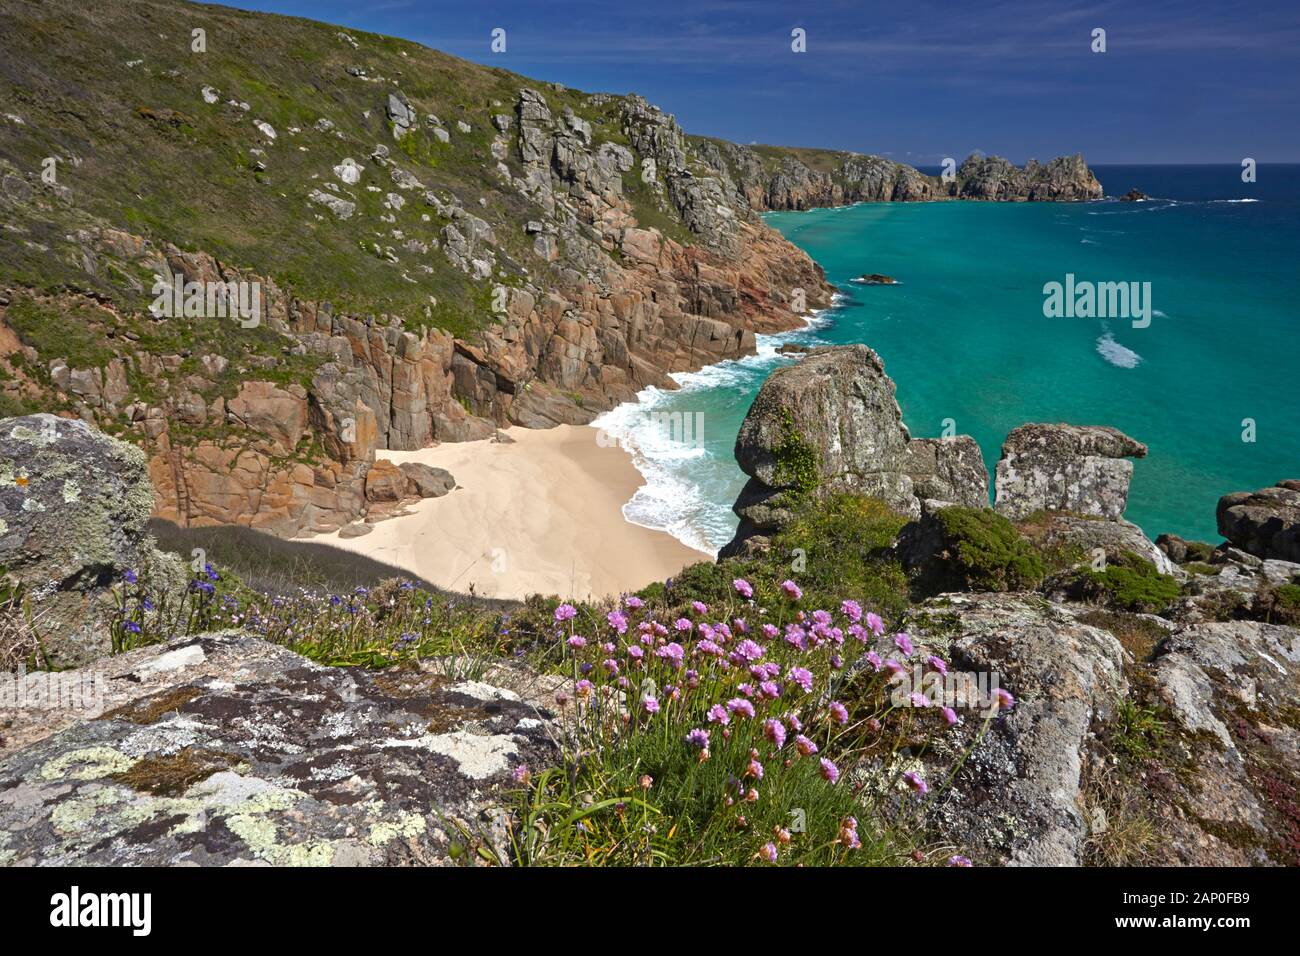 View from the clifftop to the golden sand and turquoise sea of Pednvounder Beach and Treen Cliffs. Stock Photo